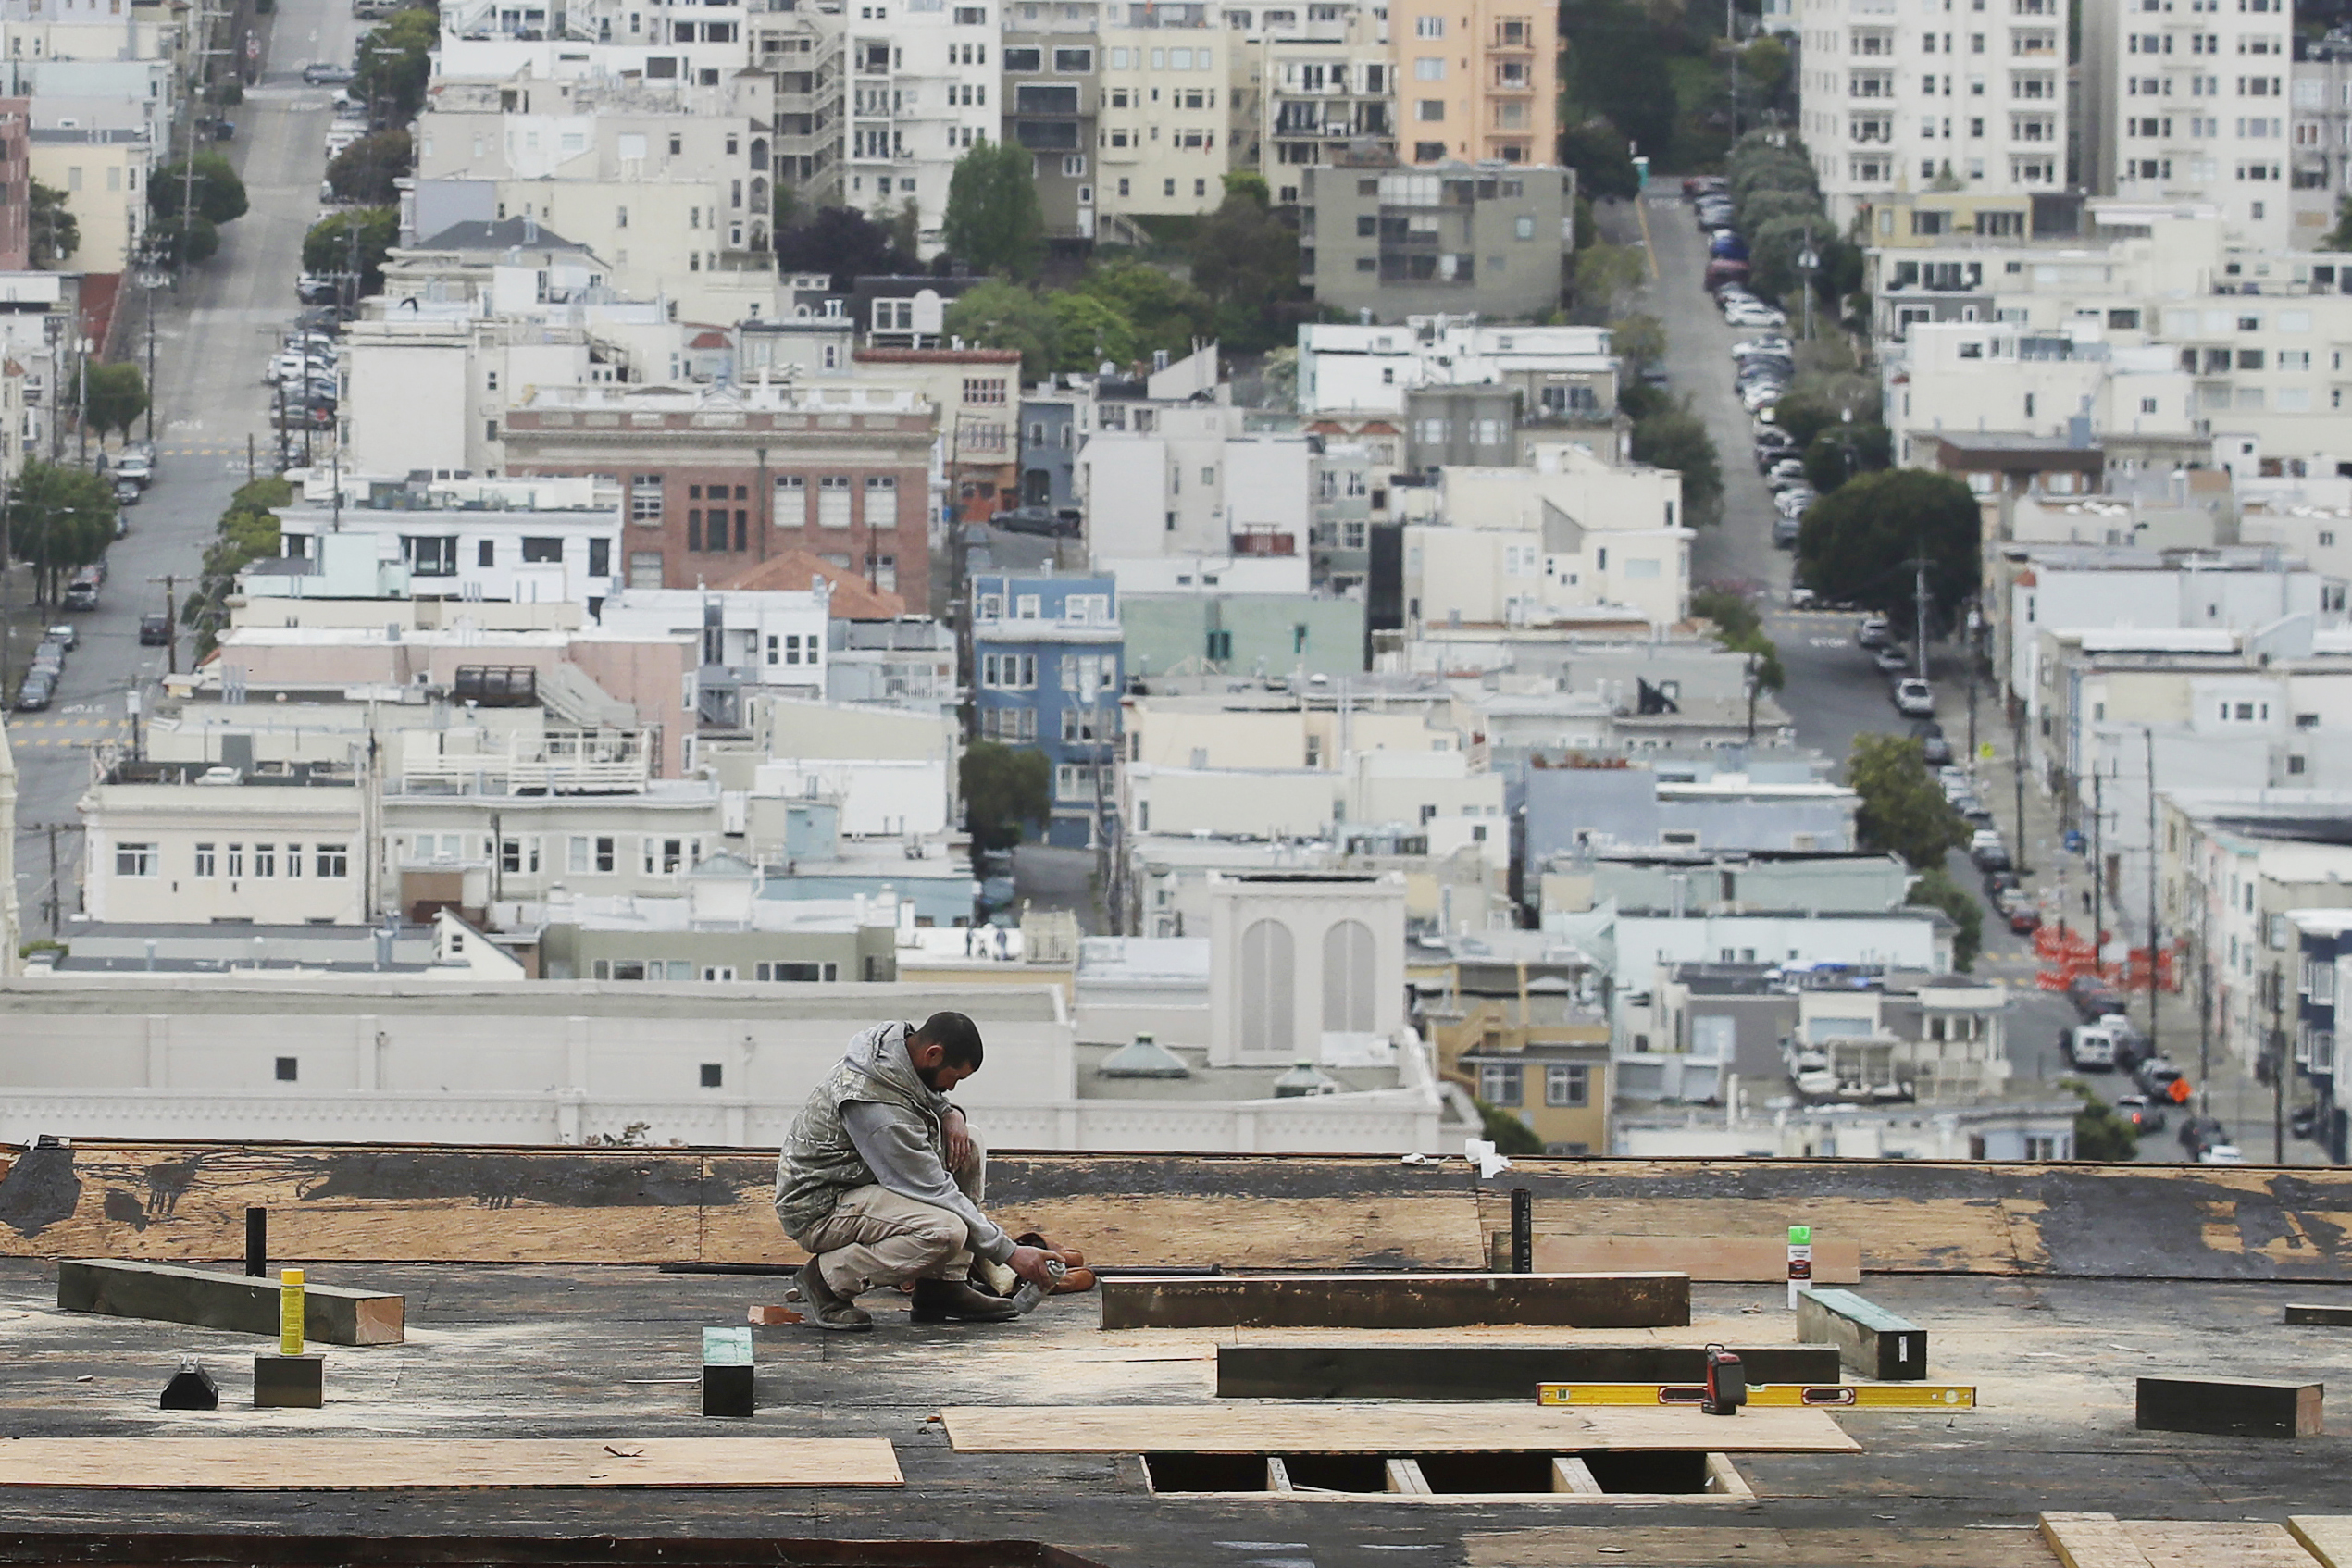 A construction workers works on the roof of a building with a neighborhood with dense homes and housing in the background